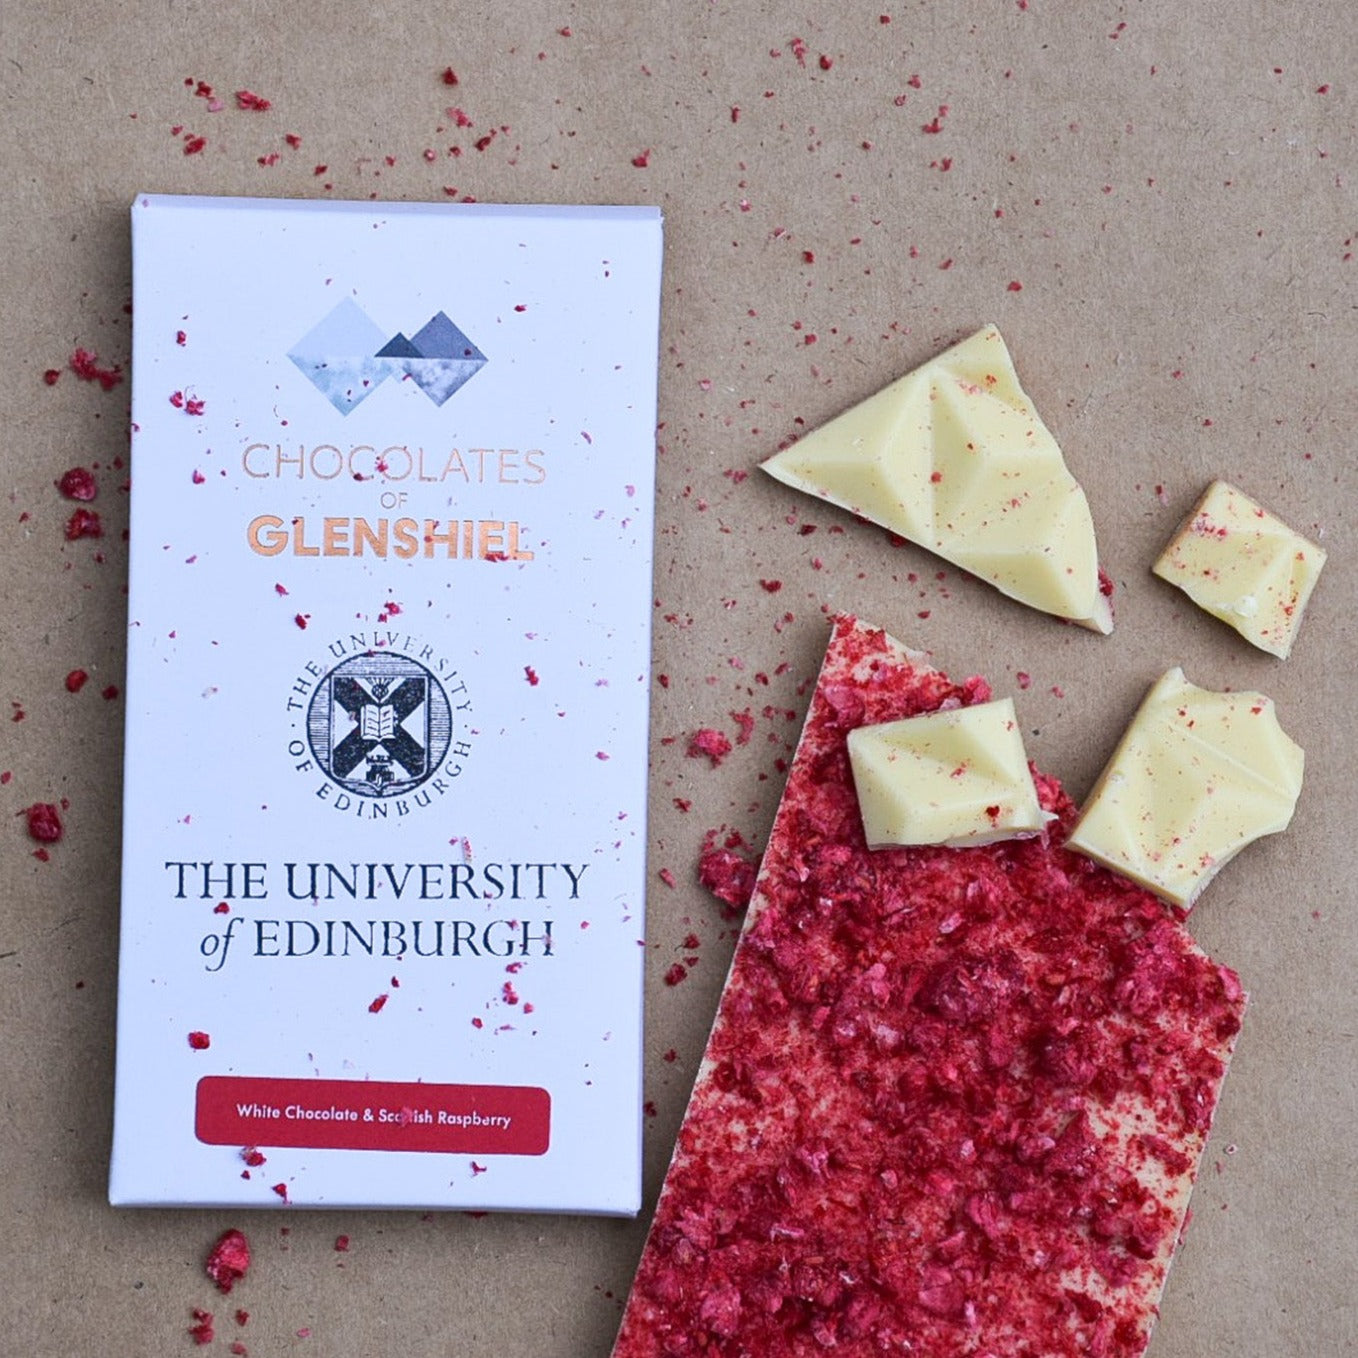 White chocolate bar with a raspberry top coating broken into pieces displayed next to its package